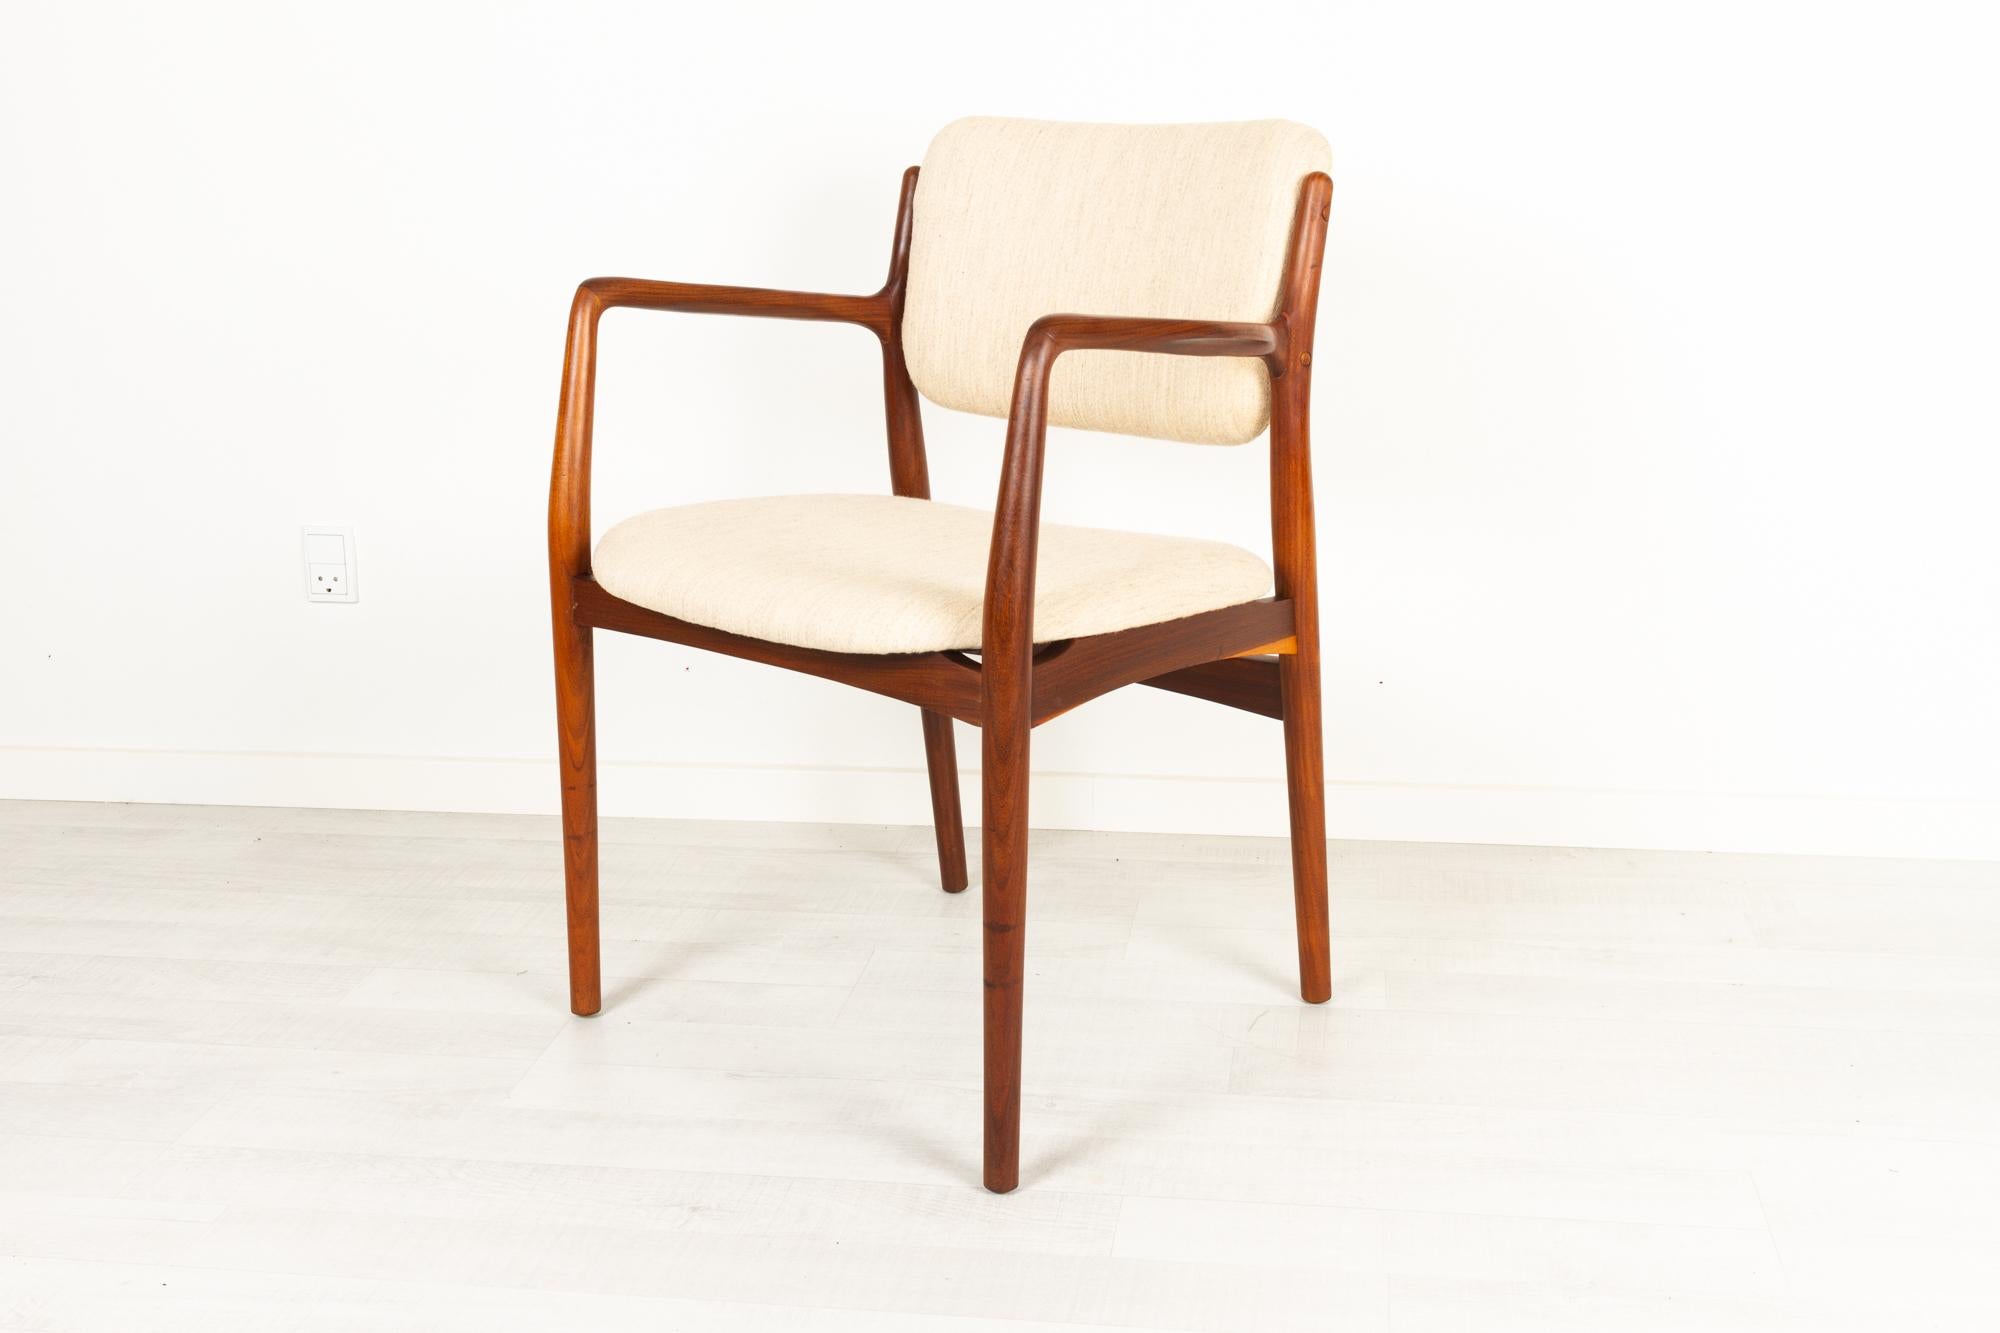 Vintage Danish teak armchair 1950s
Elegant and sculptural Danish Mid-Century Modern armchair in solid teak. Seat and backrest reupholstered in light beige wool fabric. Round tapered legs. Flared armrests.
Very beautiful teak with expressive grain